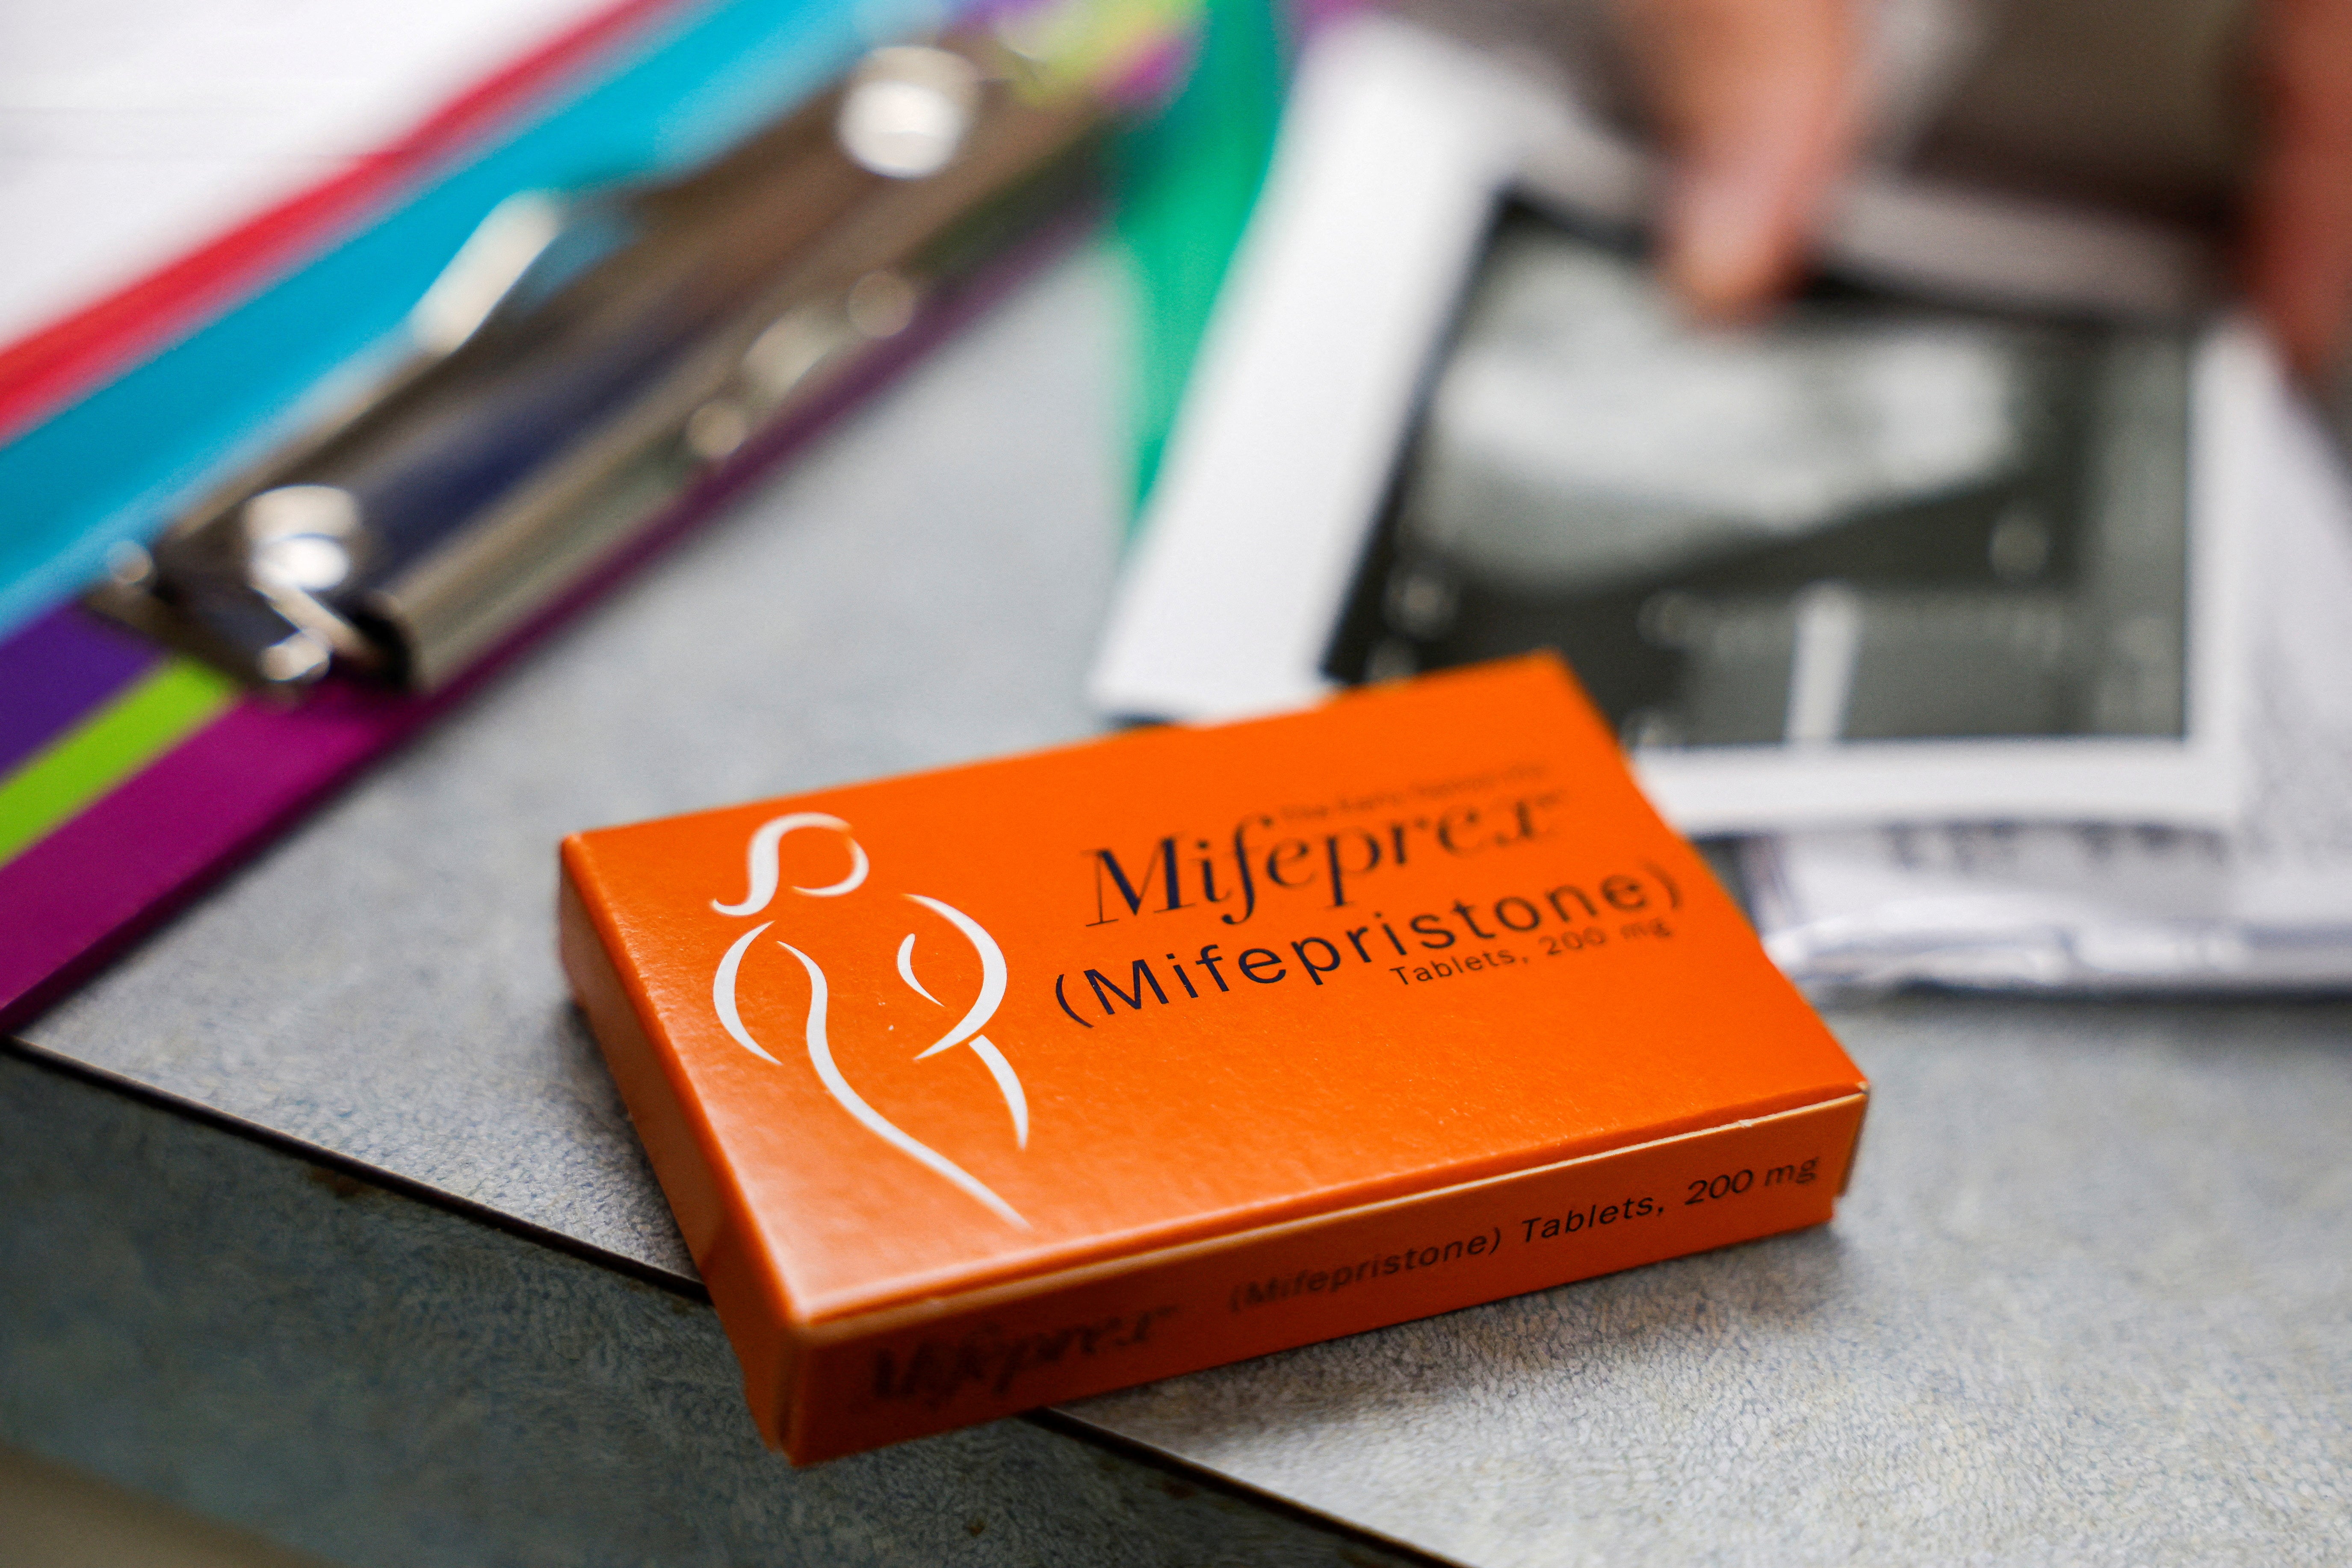 Mifepristone is approved for use for medication abortion, the most common form of abortion care in the US.